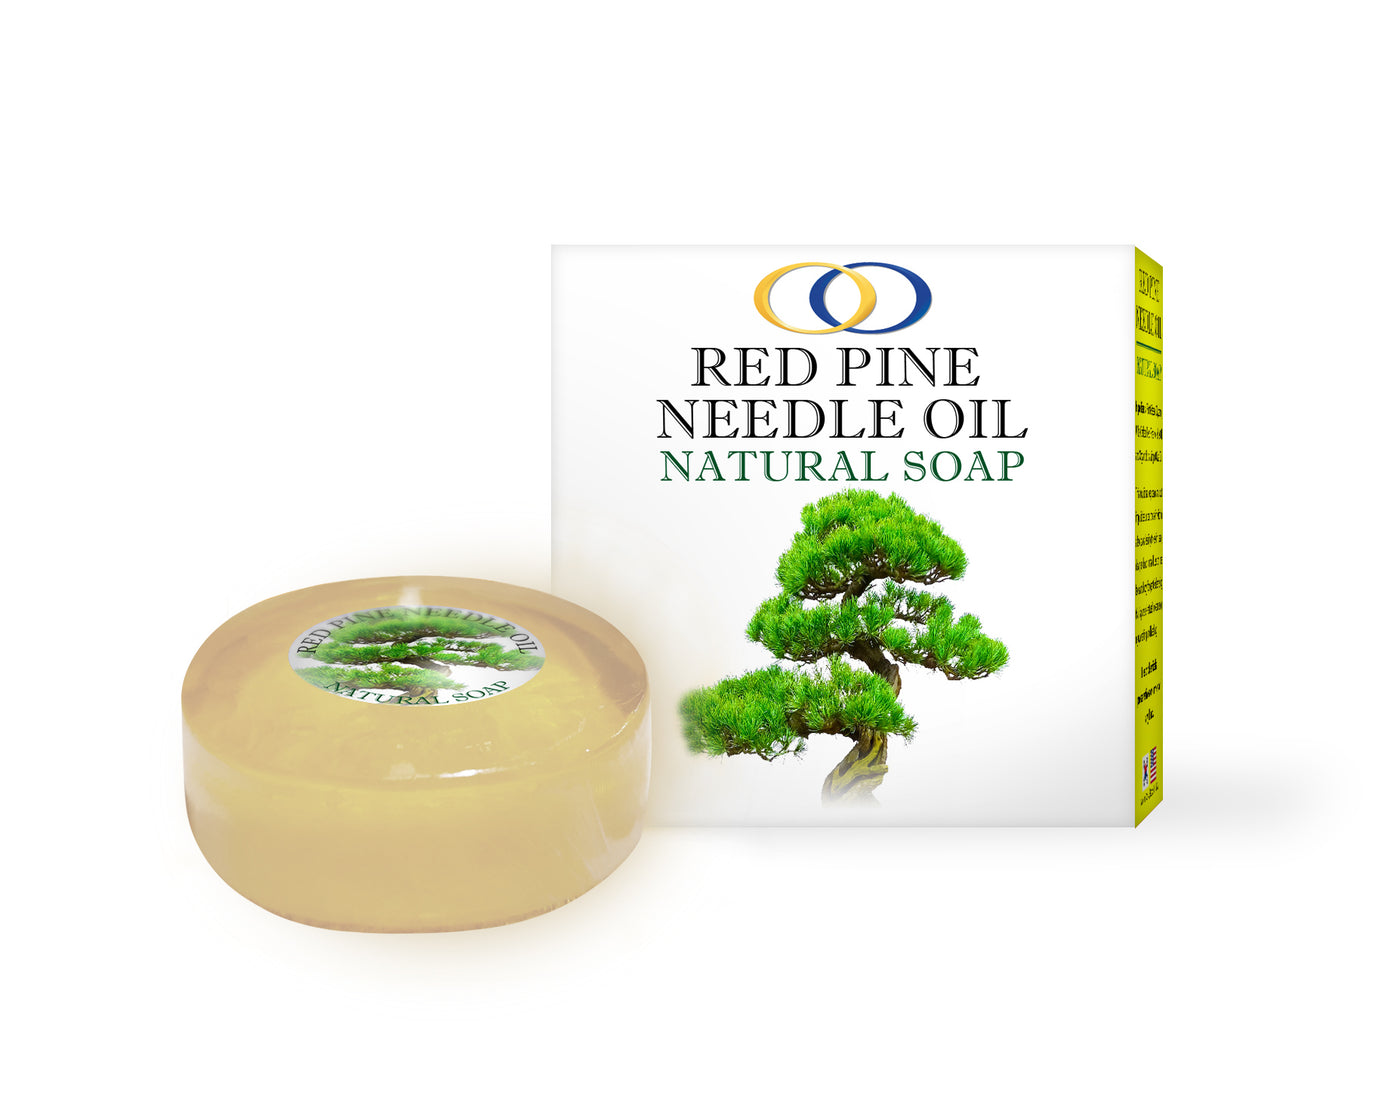 Red Pine Needle Oil - Glycerin Soap - Hand Poured in California - Optimally Organic